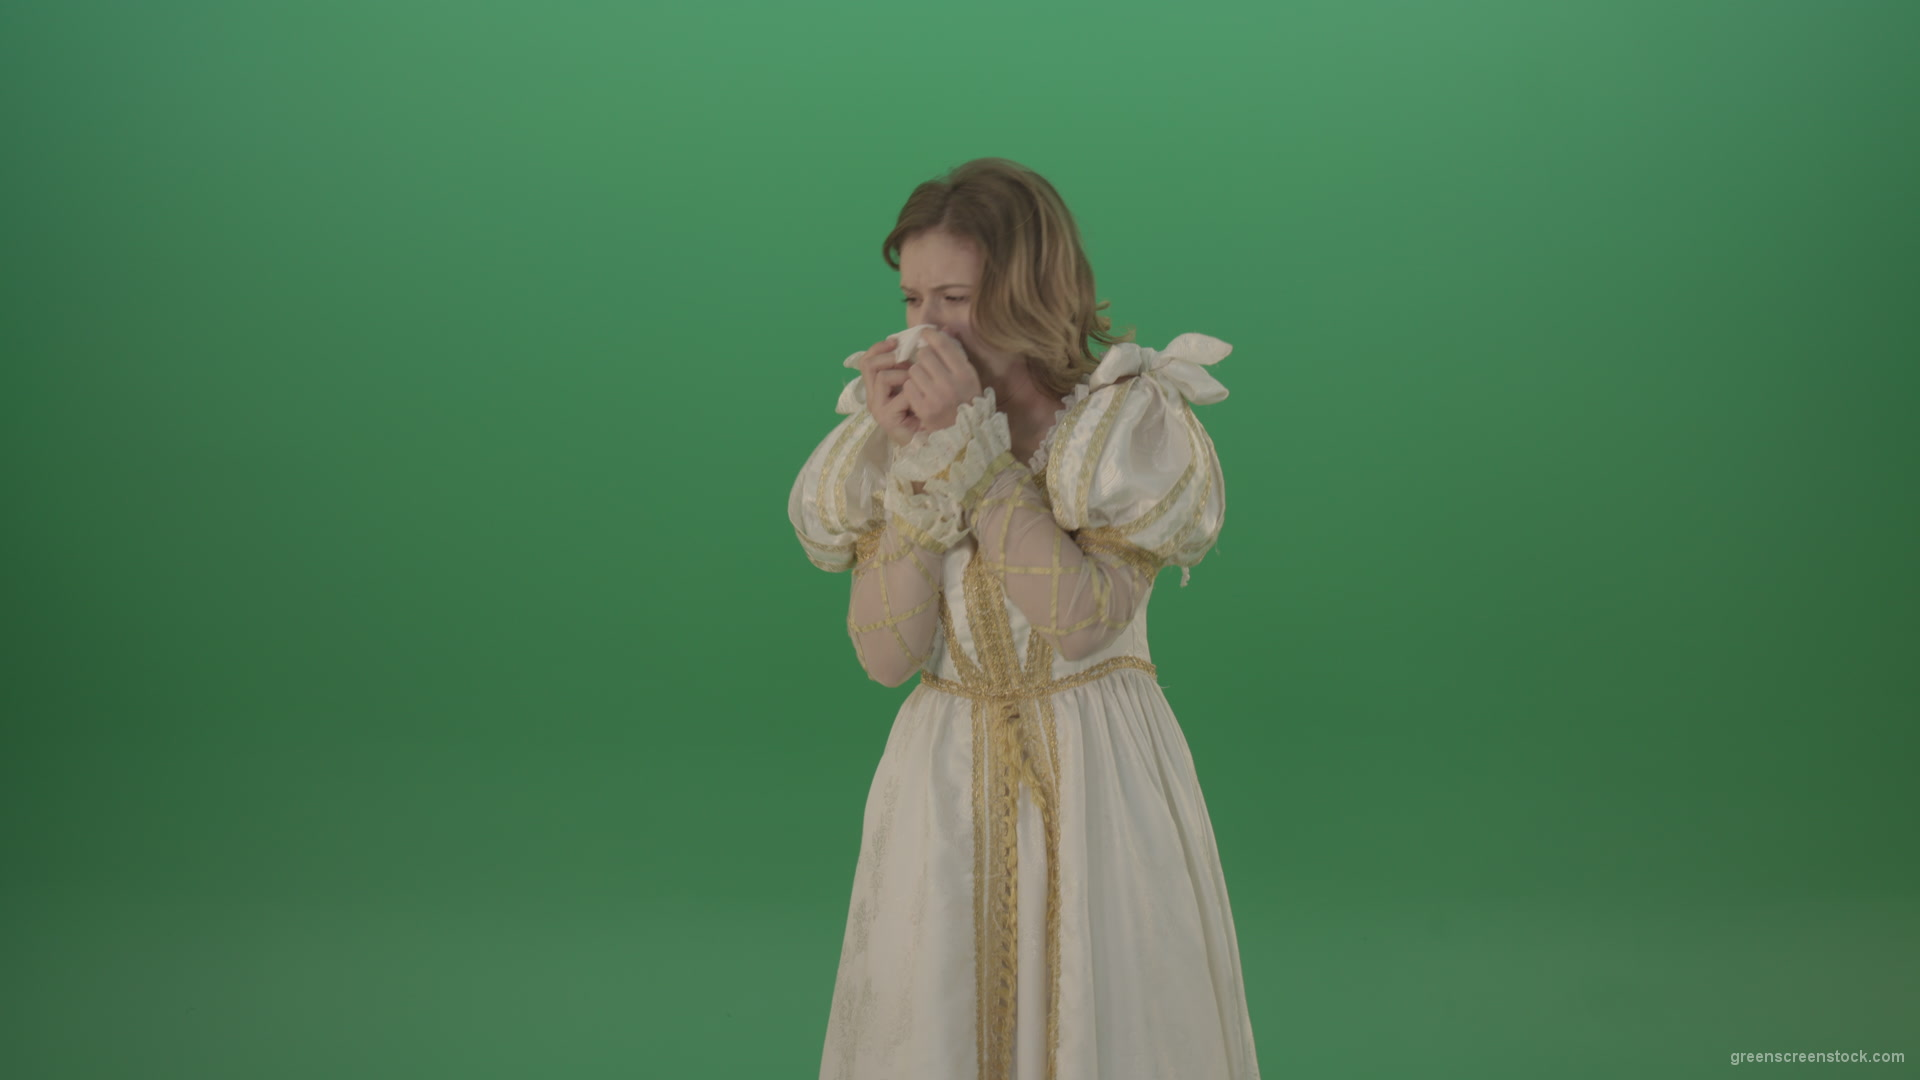 Sick-girl-coughs-and-shows-symptoms-of-the-disease-isolated-on-green-background_006 Green Screen Stock